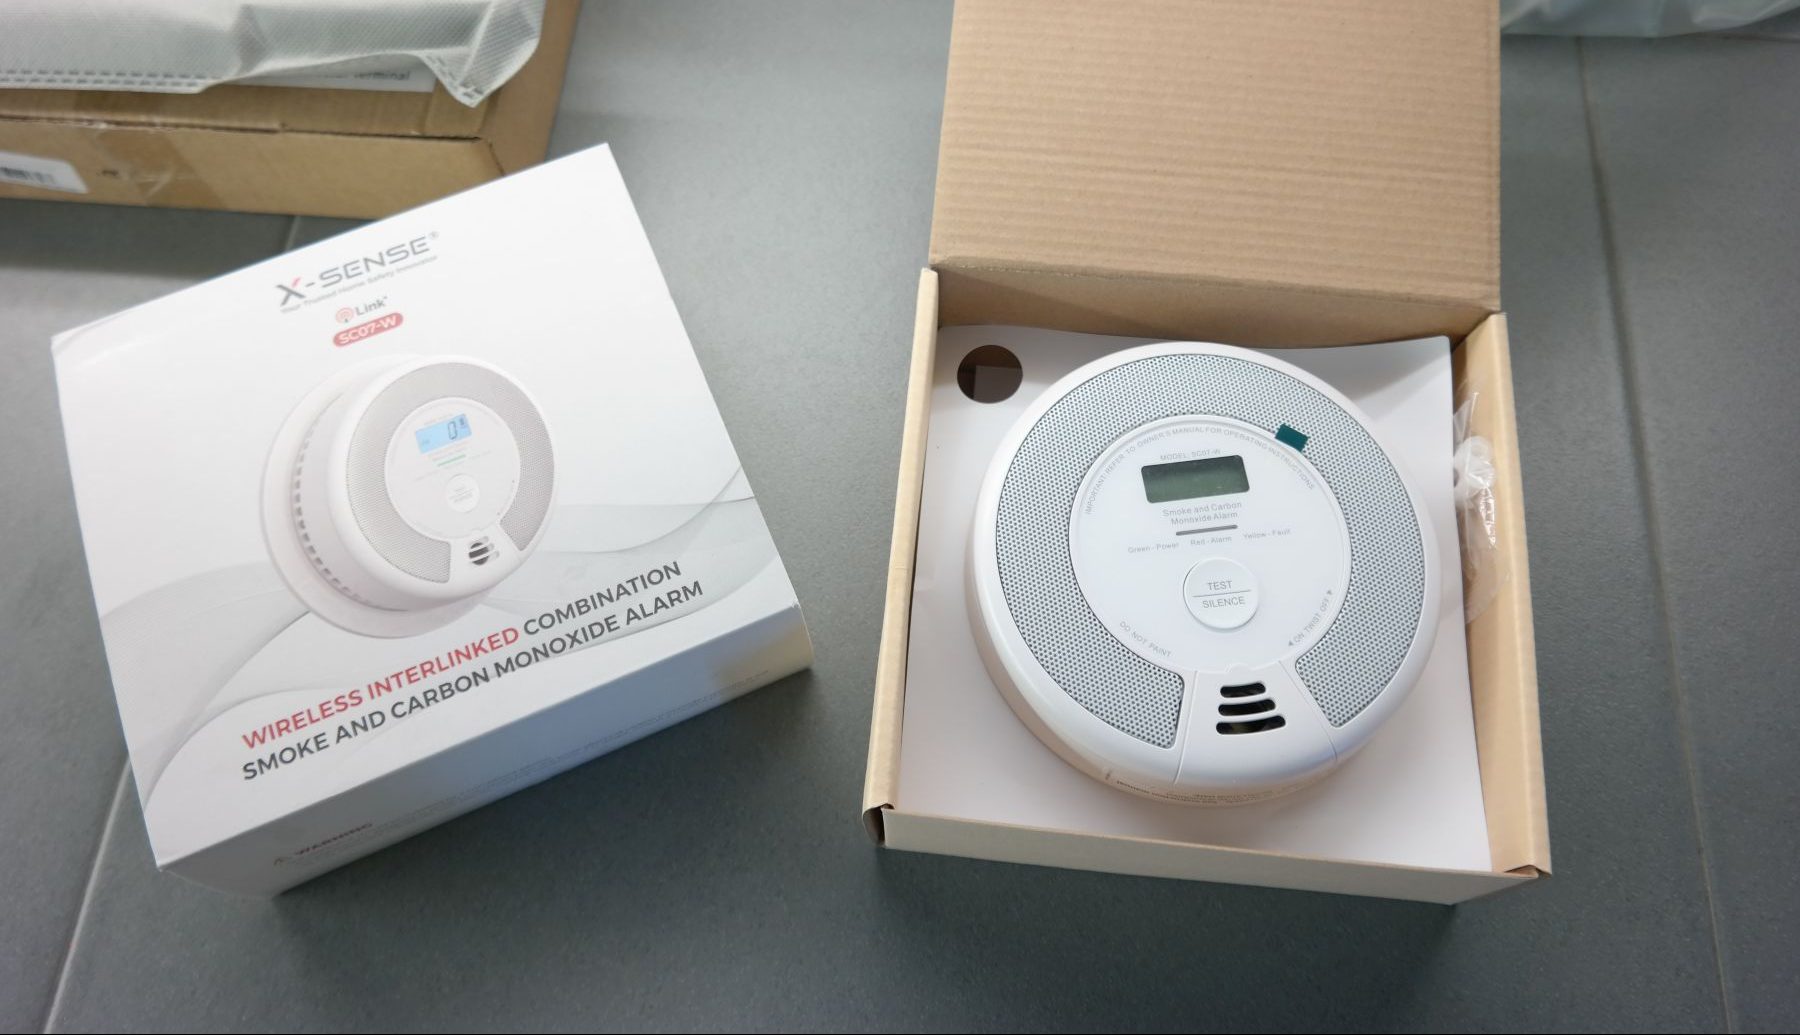 X-Sense Wireless Interconnected Combination Smoke and Carbon Monoxide Detector Review